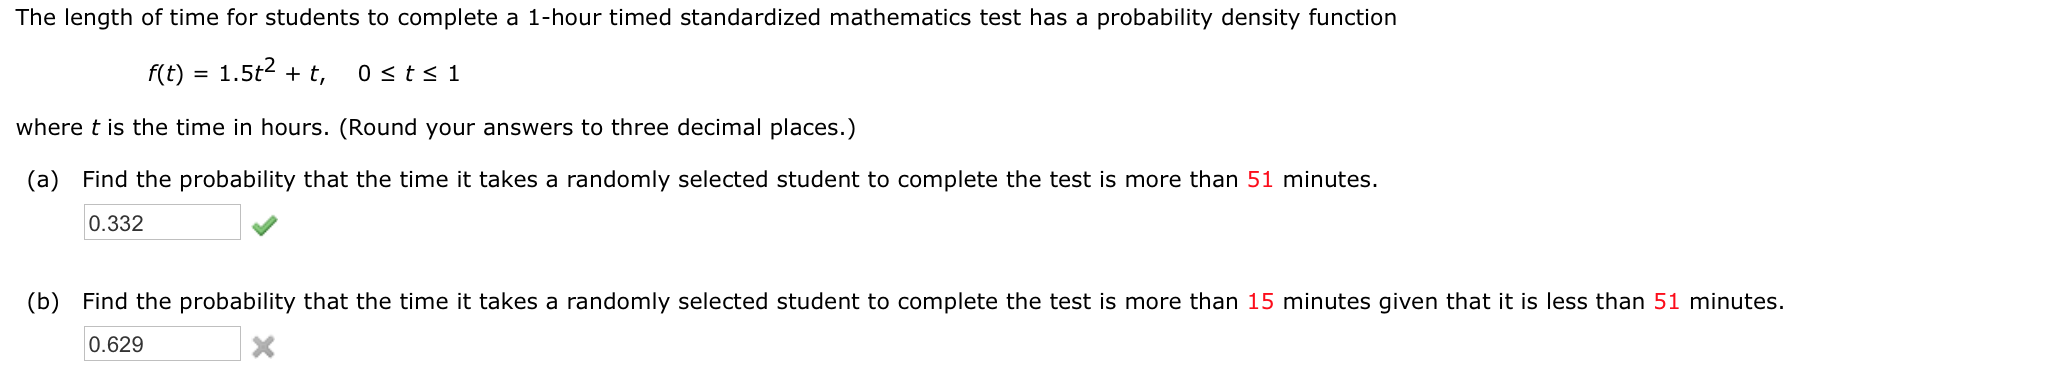 The length of time for students to complete a 1-hour timed standardized mathematics test has a probability density function
f(t) = 1.5t2 + t,
0 <ts 1
where t is the time in hours. (Round your answers to three decimal places.)
(a) Find the probability that the time it takes a randomly selected student to complete the test is more than 51 minutes.
0.332
(b) Find the probability that the time it takes a randomly selected student to complete the test is more than 15 minutes given that it is less than 51 minutes.
